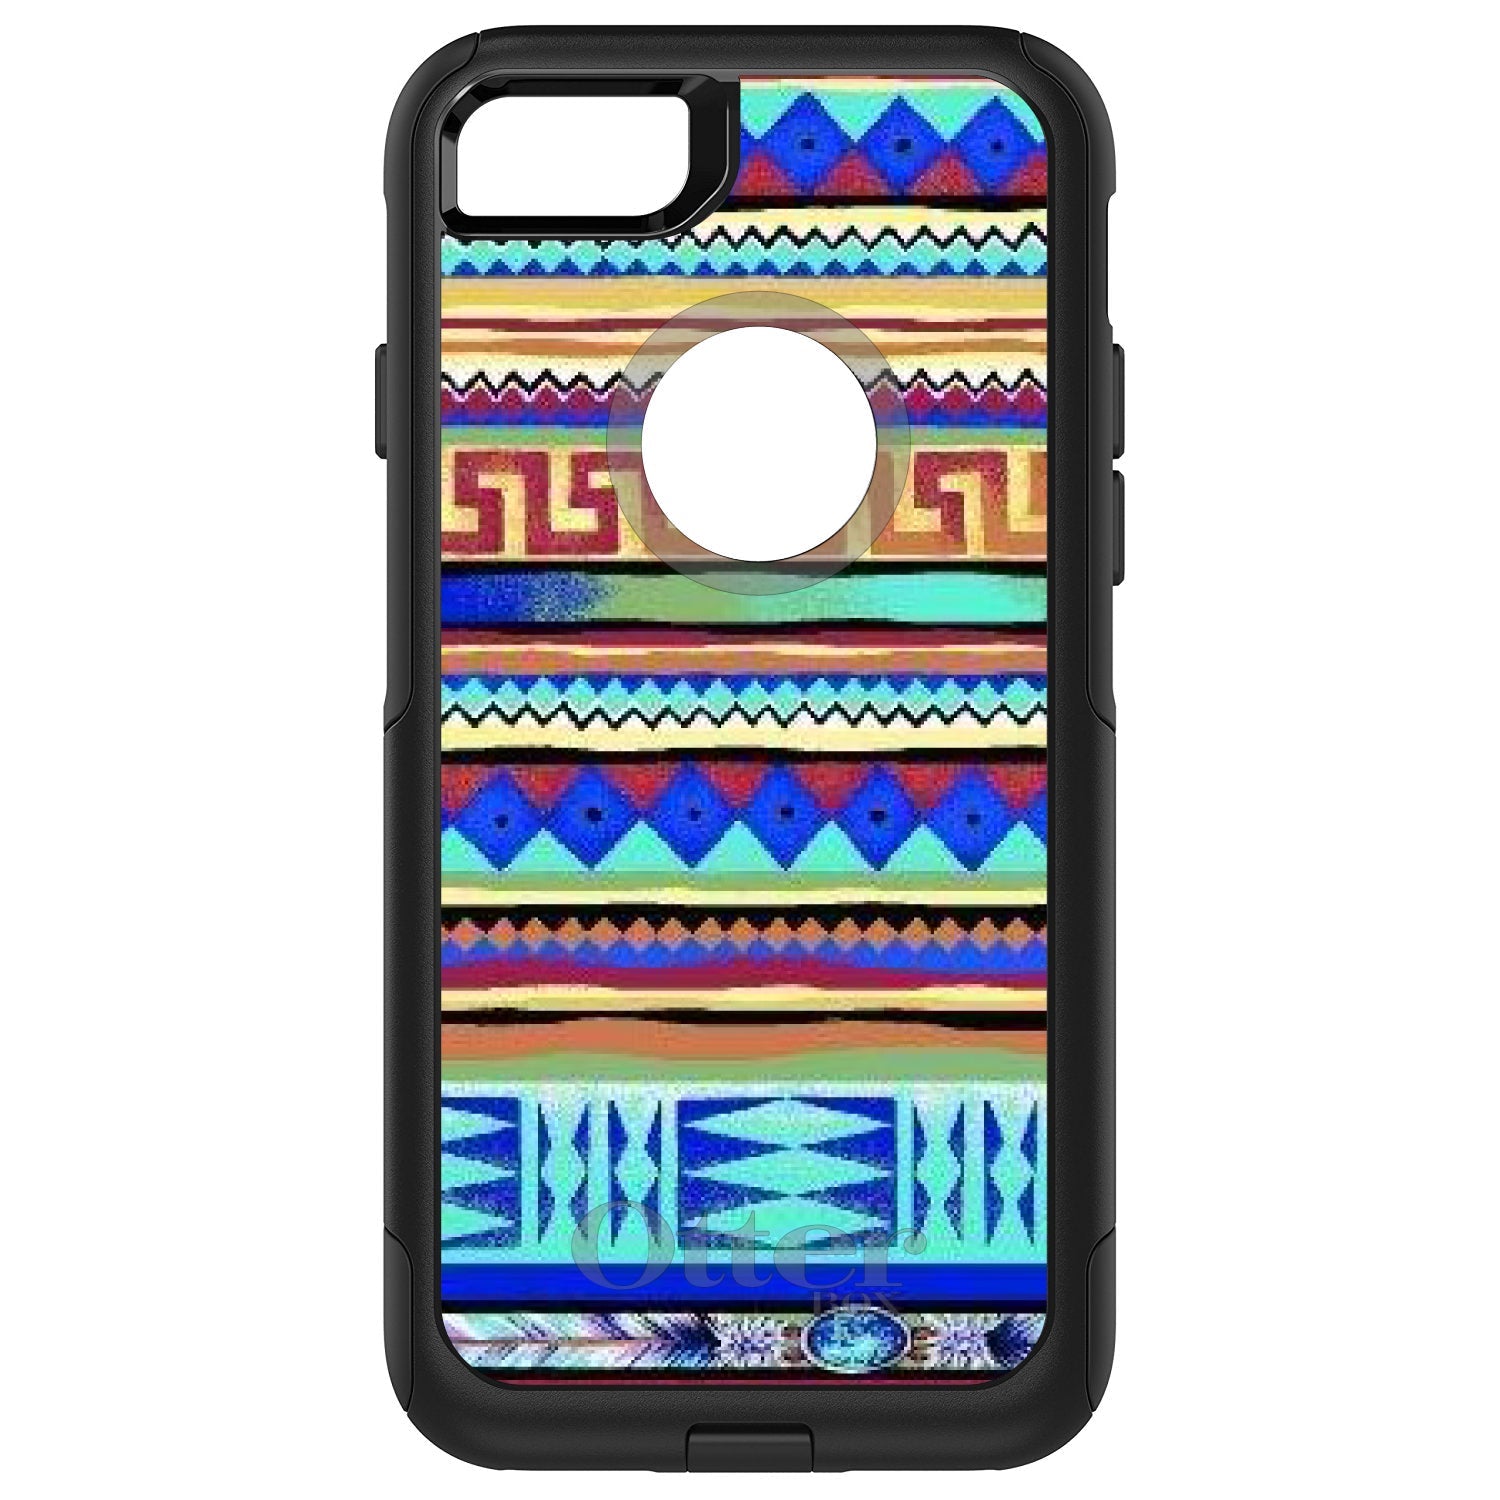 DistinctInk? OtterBox Commuter Series Case for Apple iPhone or Samsung Galaxy - Blue Red Yellow Tribal Print